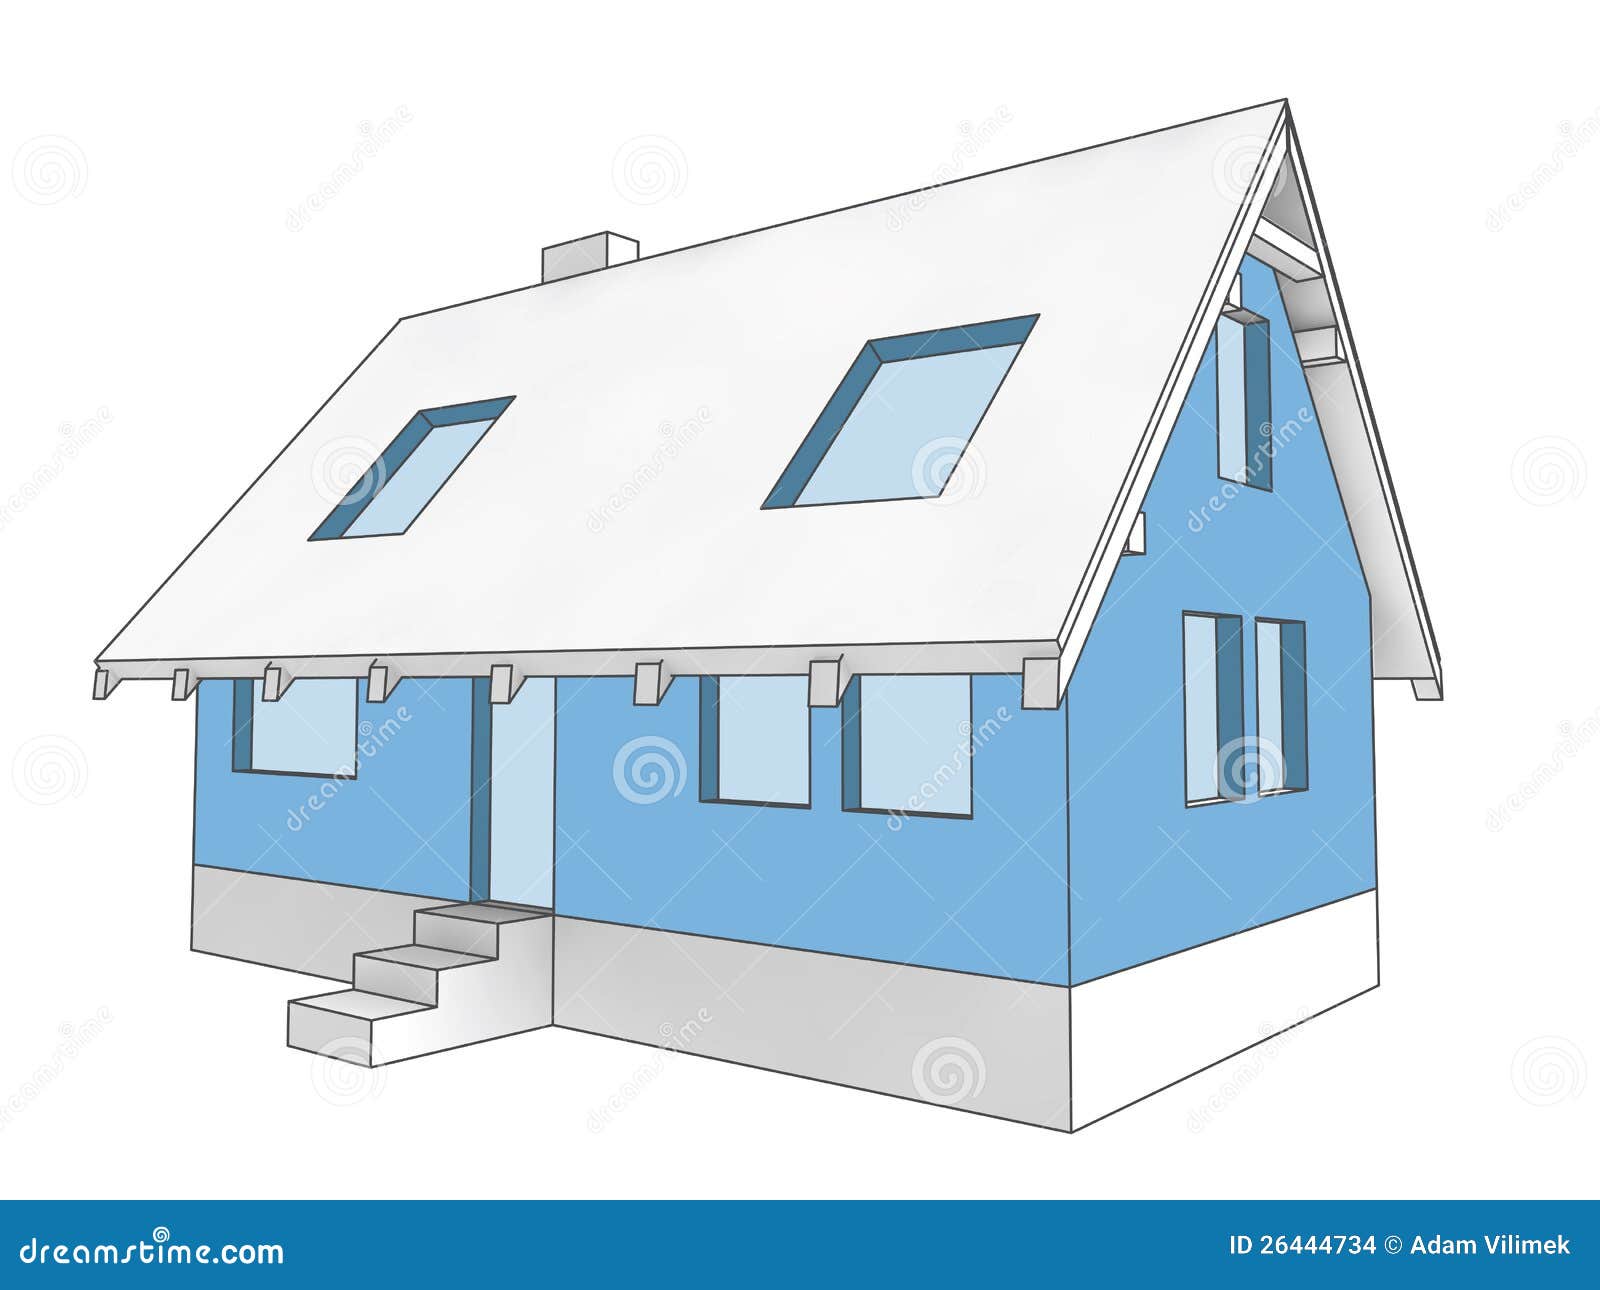 Diagram Icon Building Facade Of House Stock Images